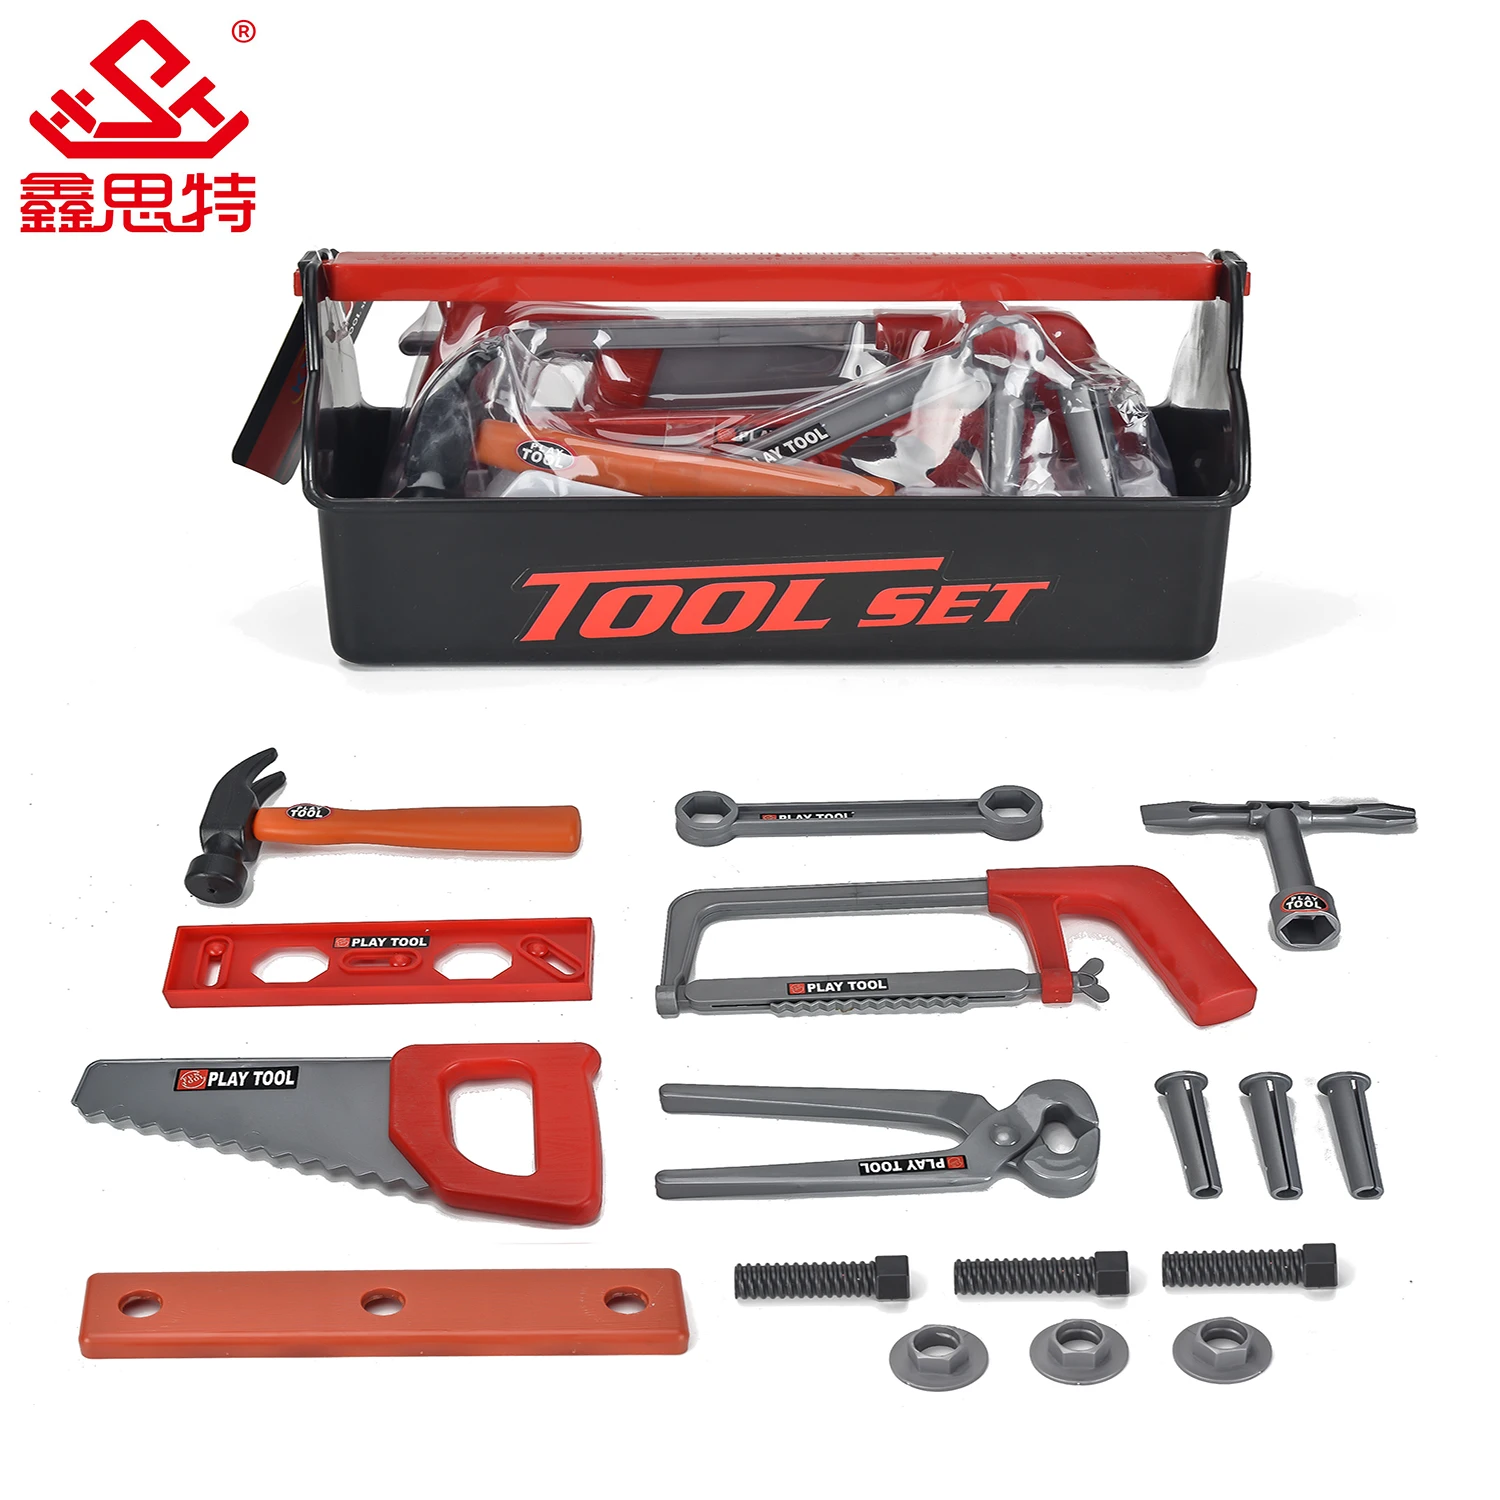 XST The New Listing Boy Toys Drill Electrician Toy Mechanic Tool Box Set